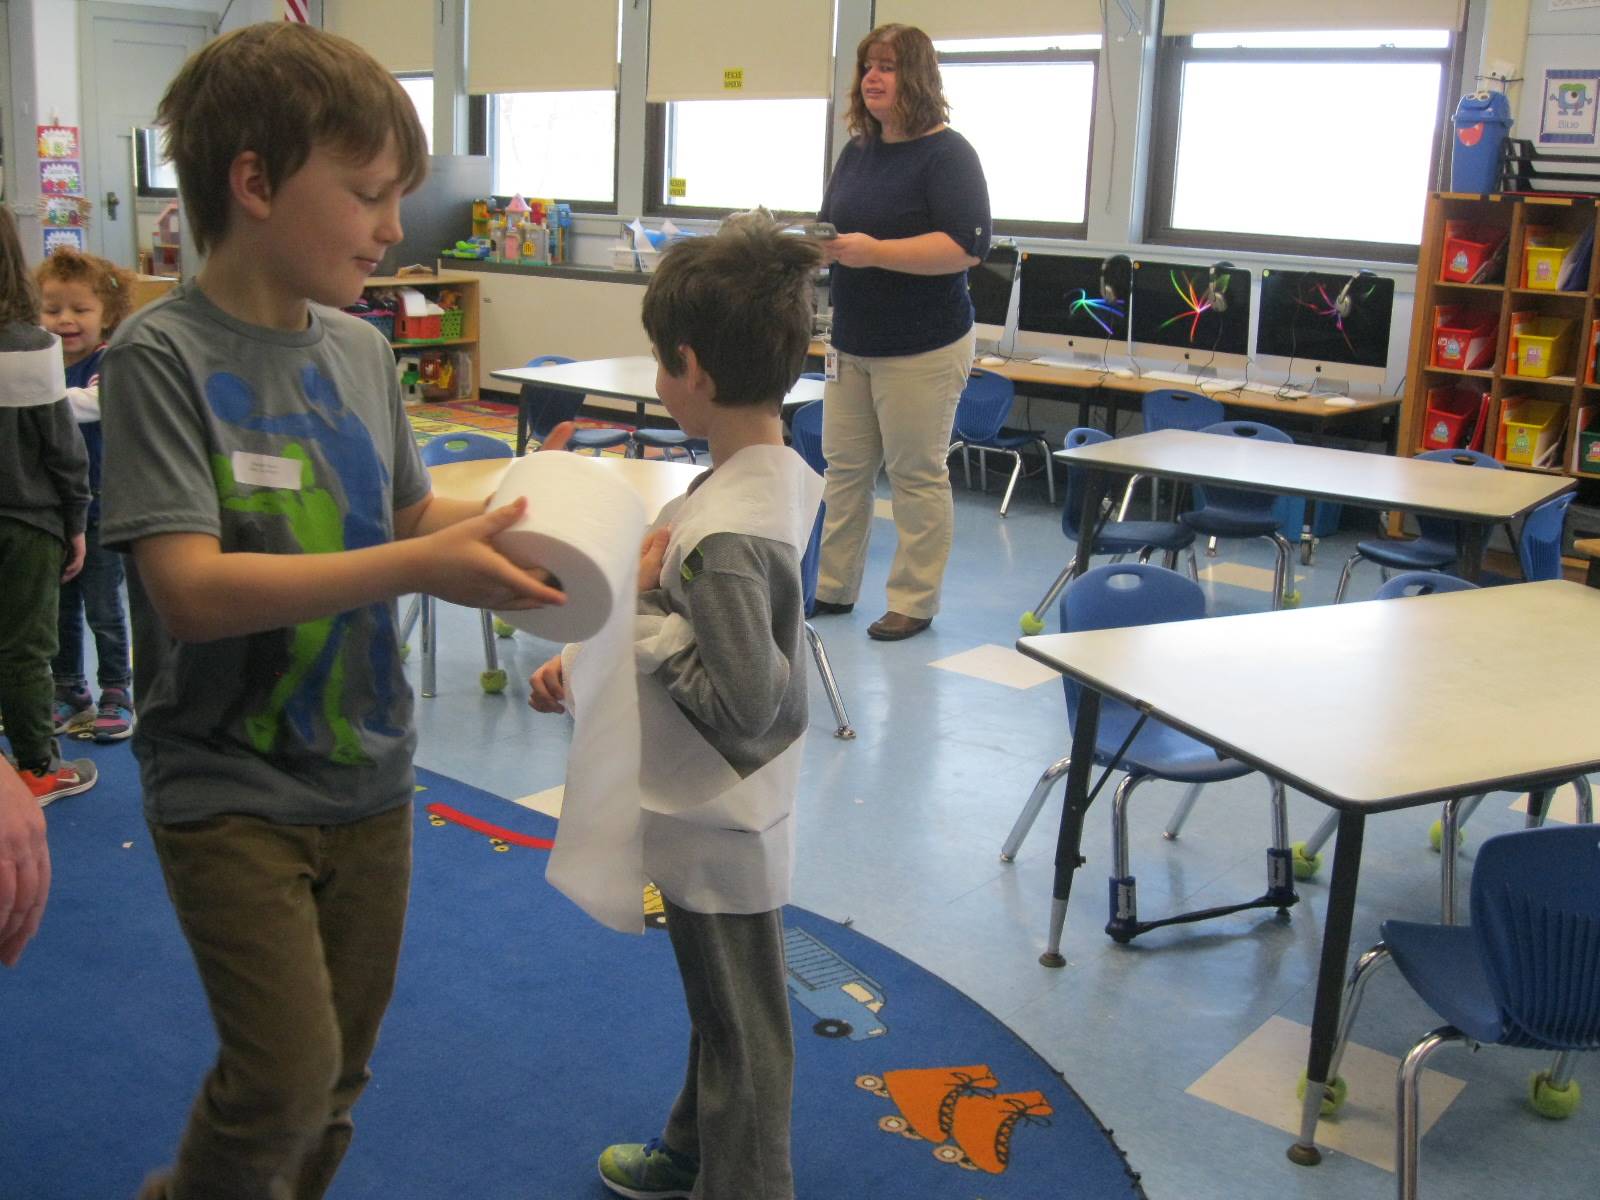 2 students playing a game with toilet paper